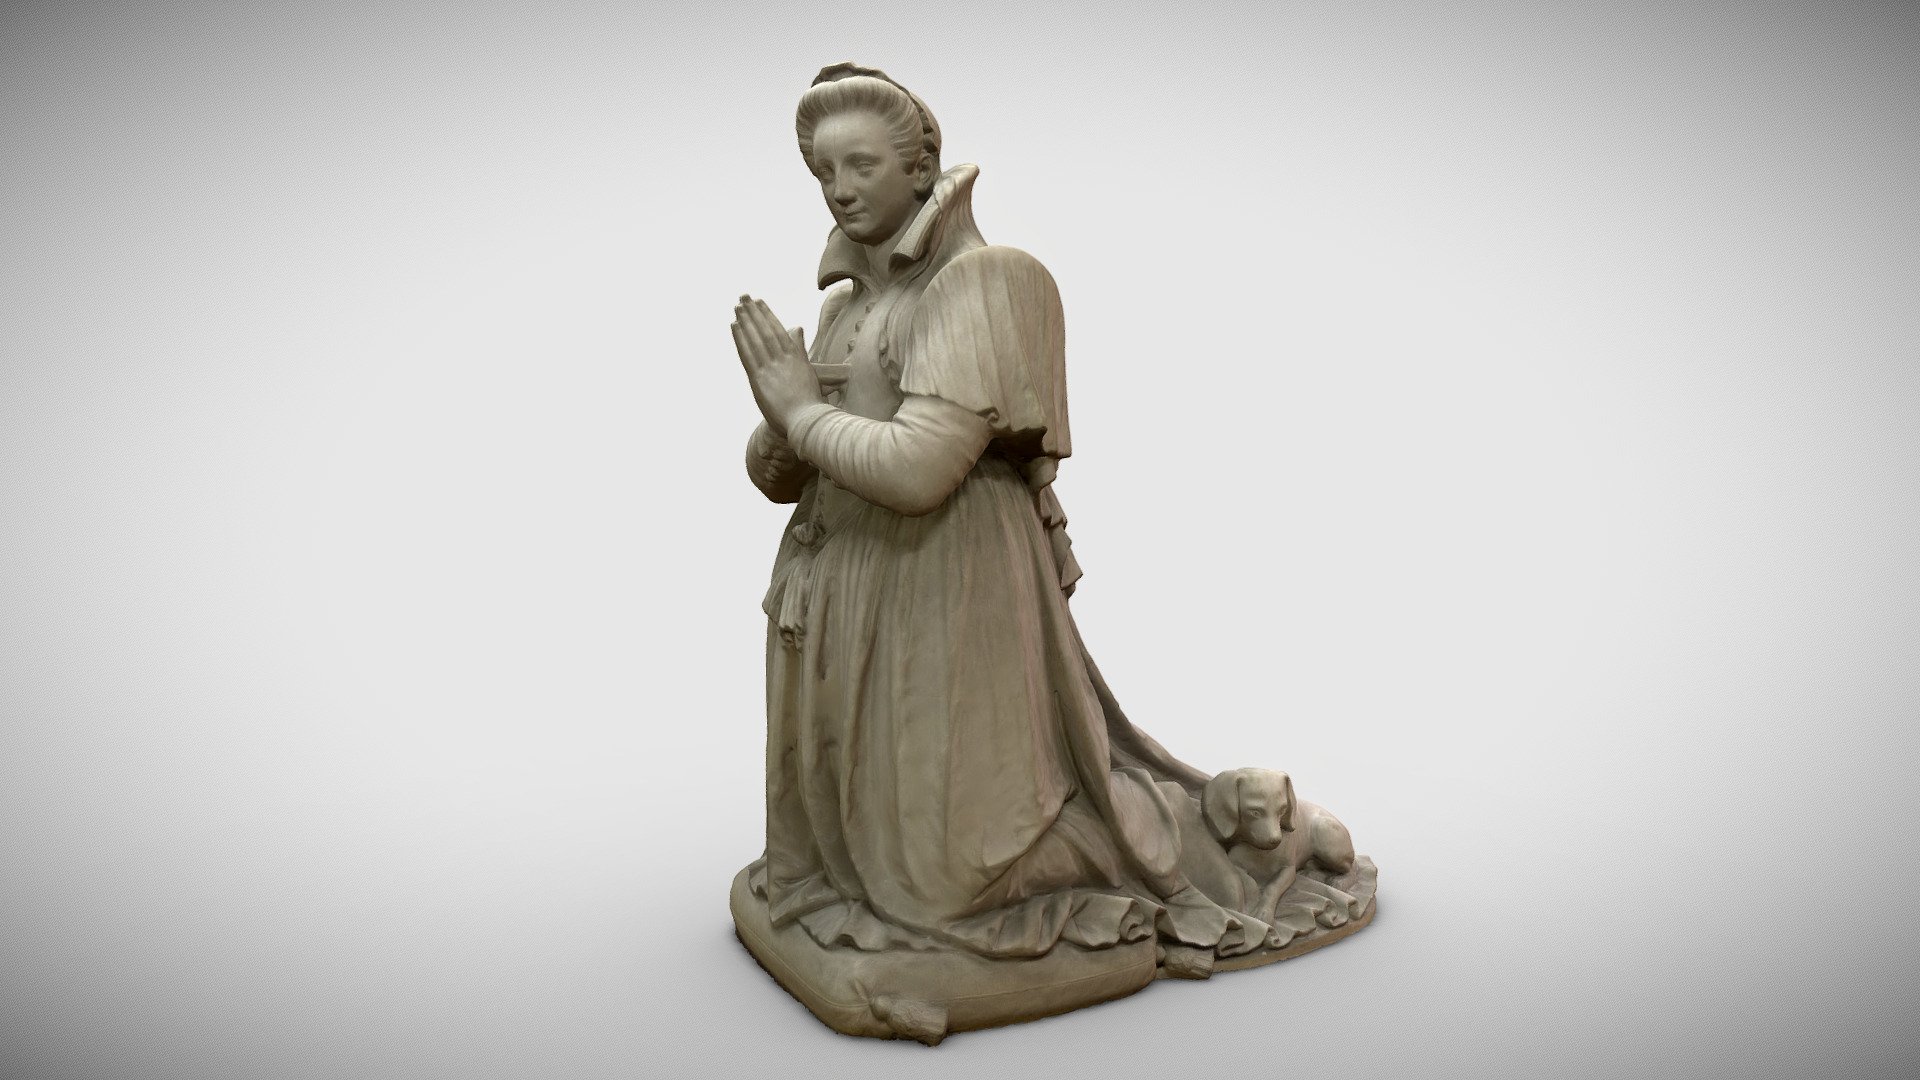 Marie de Barbancon-Cany (1601-1602?), kneeling and praying, Barthélemy (1540 - 1611), Paris, Saint-André-des-Arc, de Thou’s. Paris, Louvre. The Royal Cast Collection (Copenhagen, Denmark). Made with 320 pictures with Metashape from Agisoft. Dimension: 135 x 62 x 116.5 cm.

For more updates, please consider to follow me on Twitter at @GeoffreyMarchal. (https://twitter.com/GeoffreyMarchal) - Marie De Barbancon-Cany - Buy Royalty Free 3D model by Geoffrey Marchal (@geoffreymarchal) 3d model